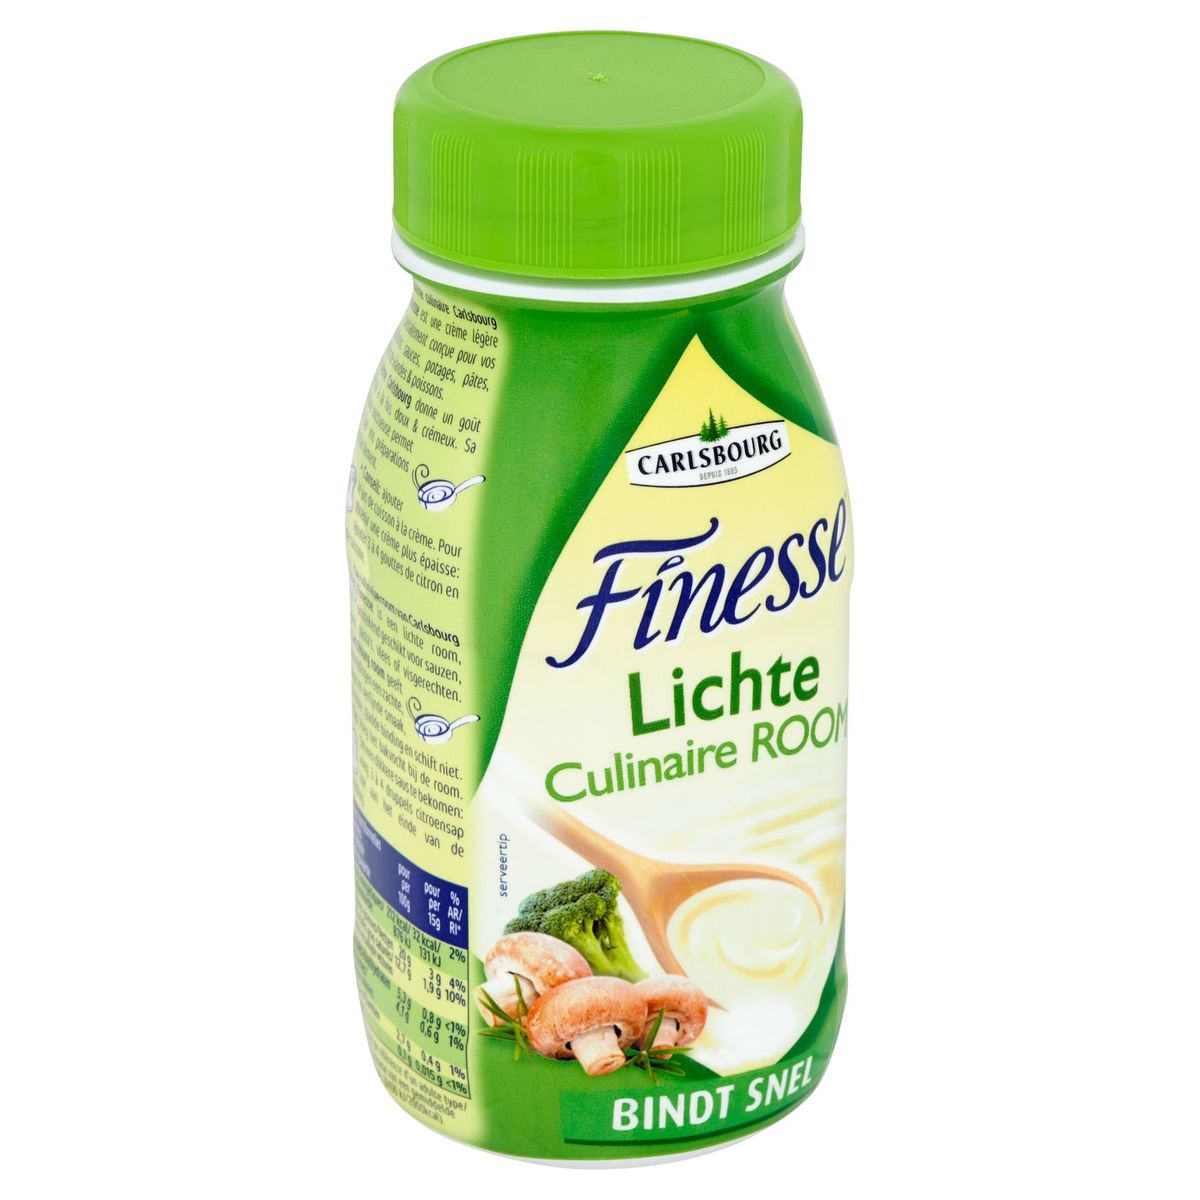 Carlsbourg Finesse Lichte Culinaire Room 25 cl